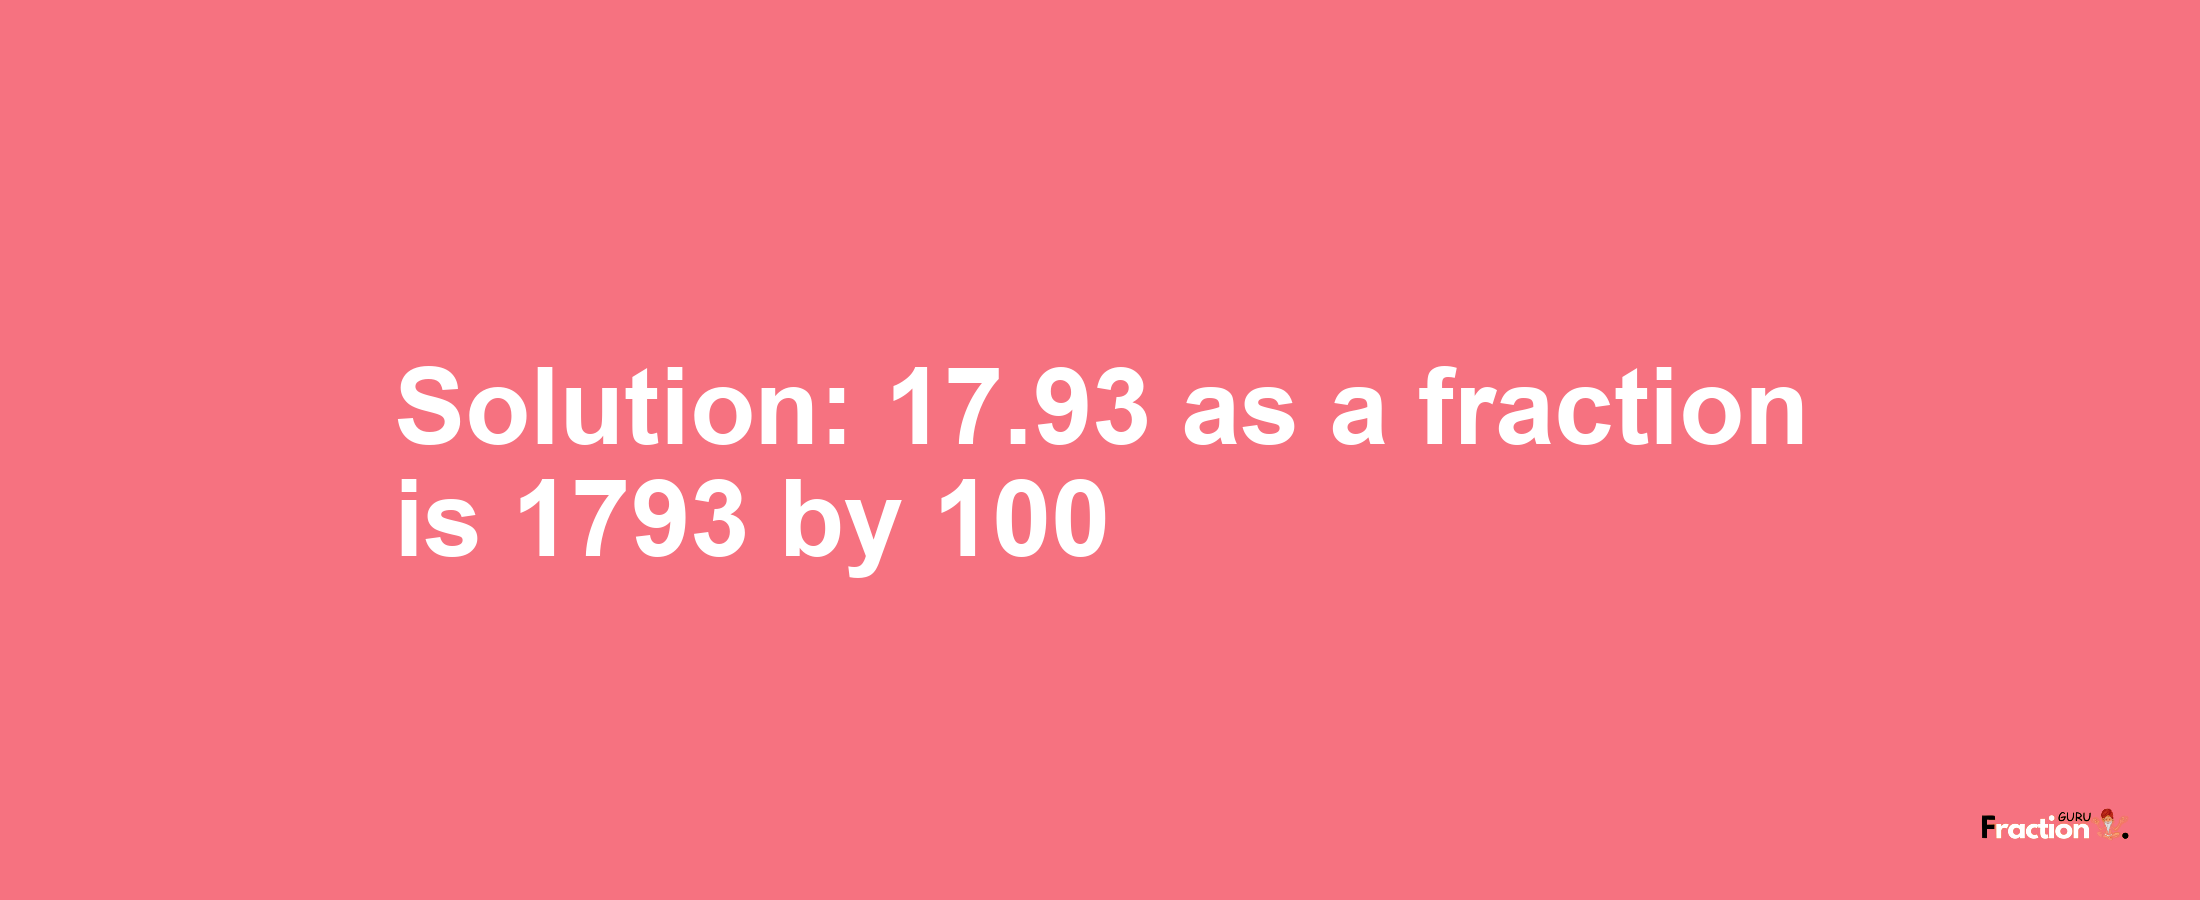 Solution:17.93 as a fraction is 1793/100